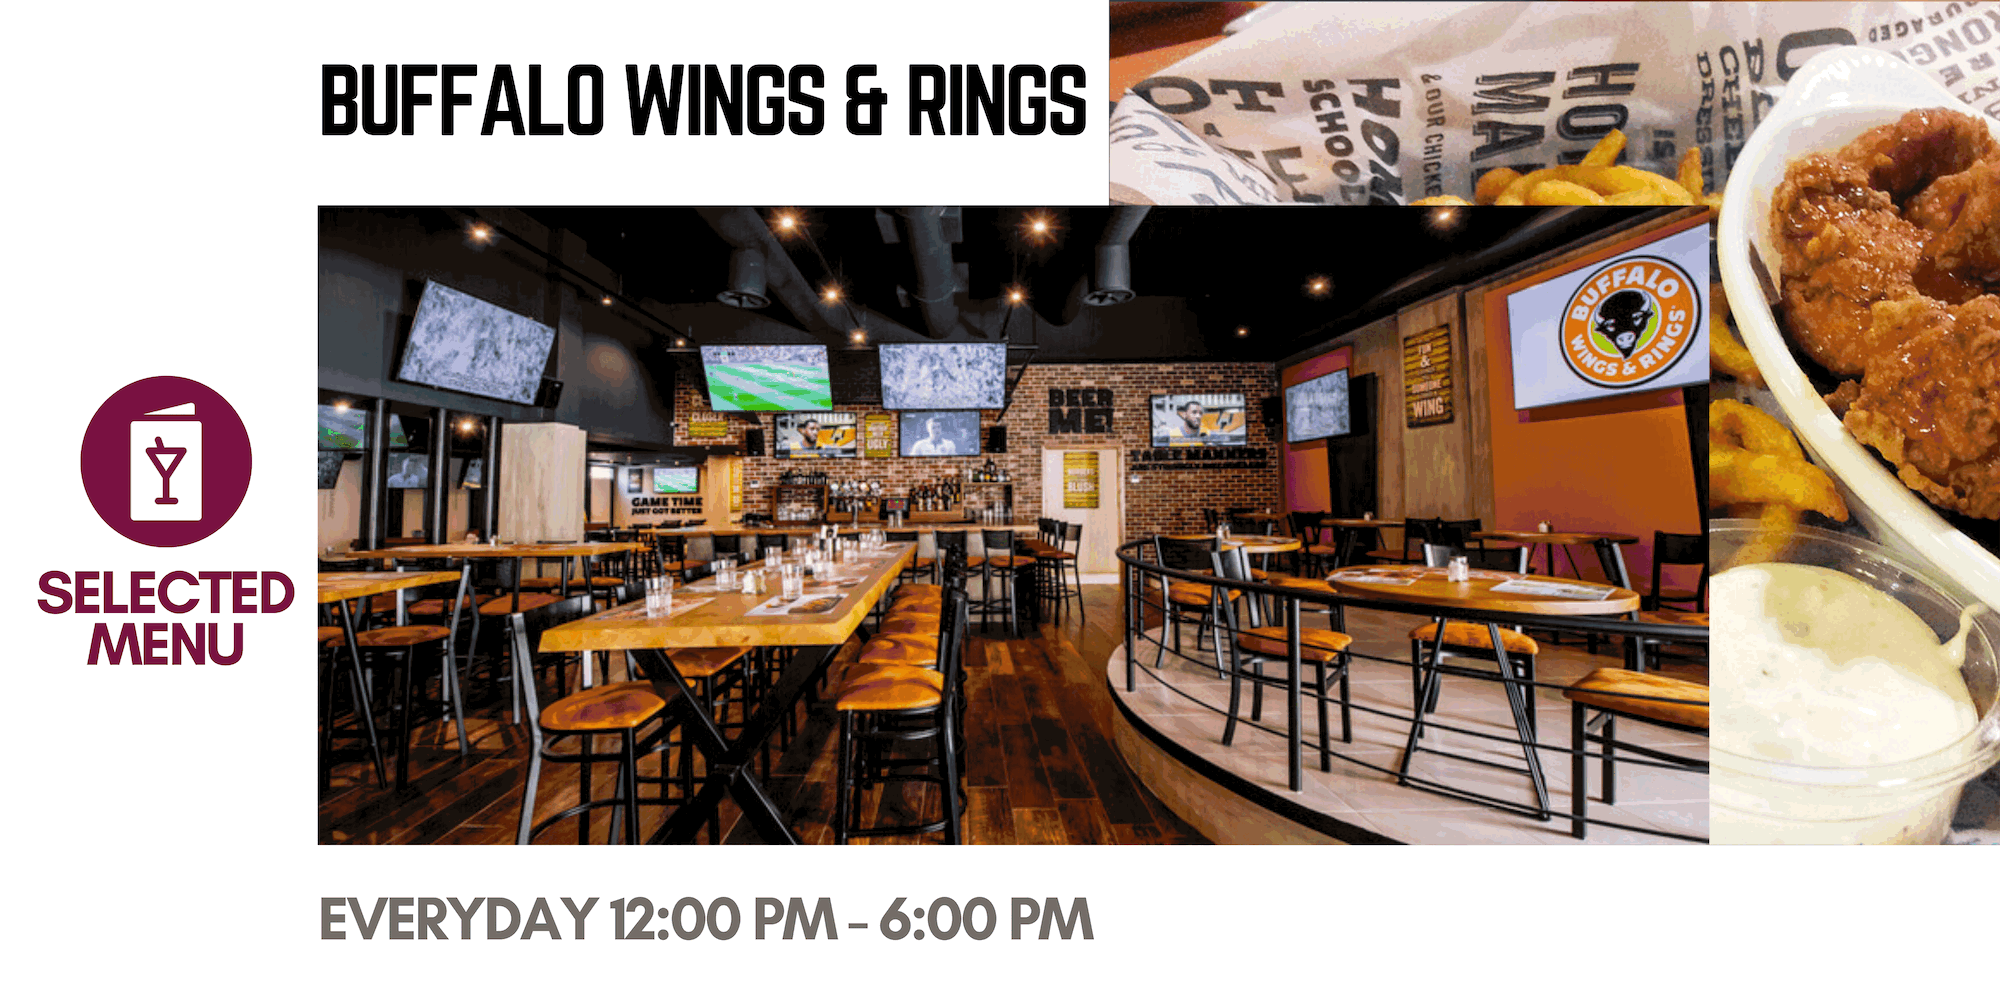 Buffalo Wings & Rings Creates New Dine-In Concept VMSD.com